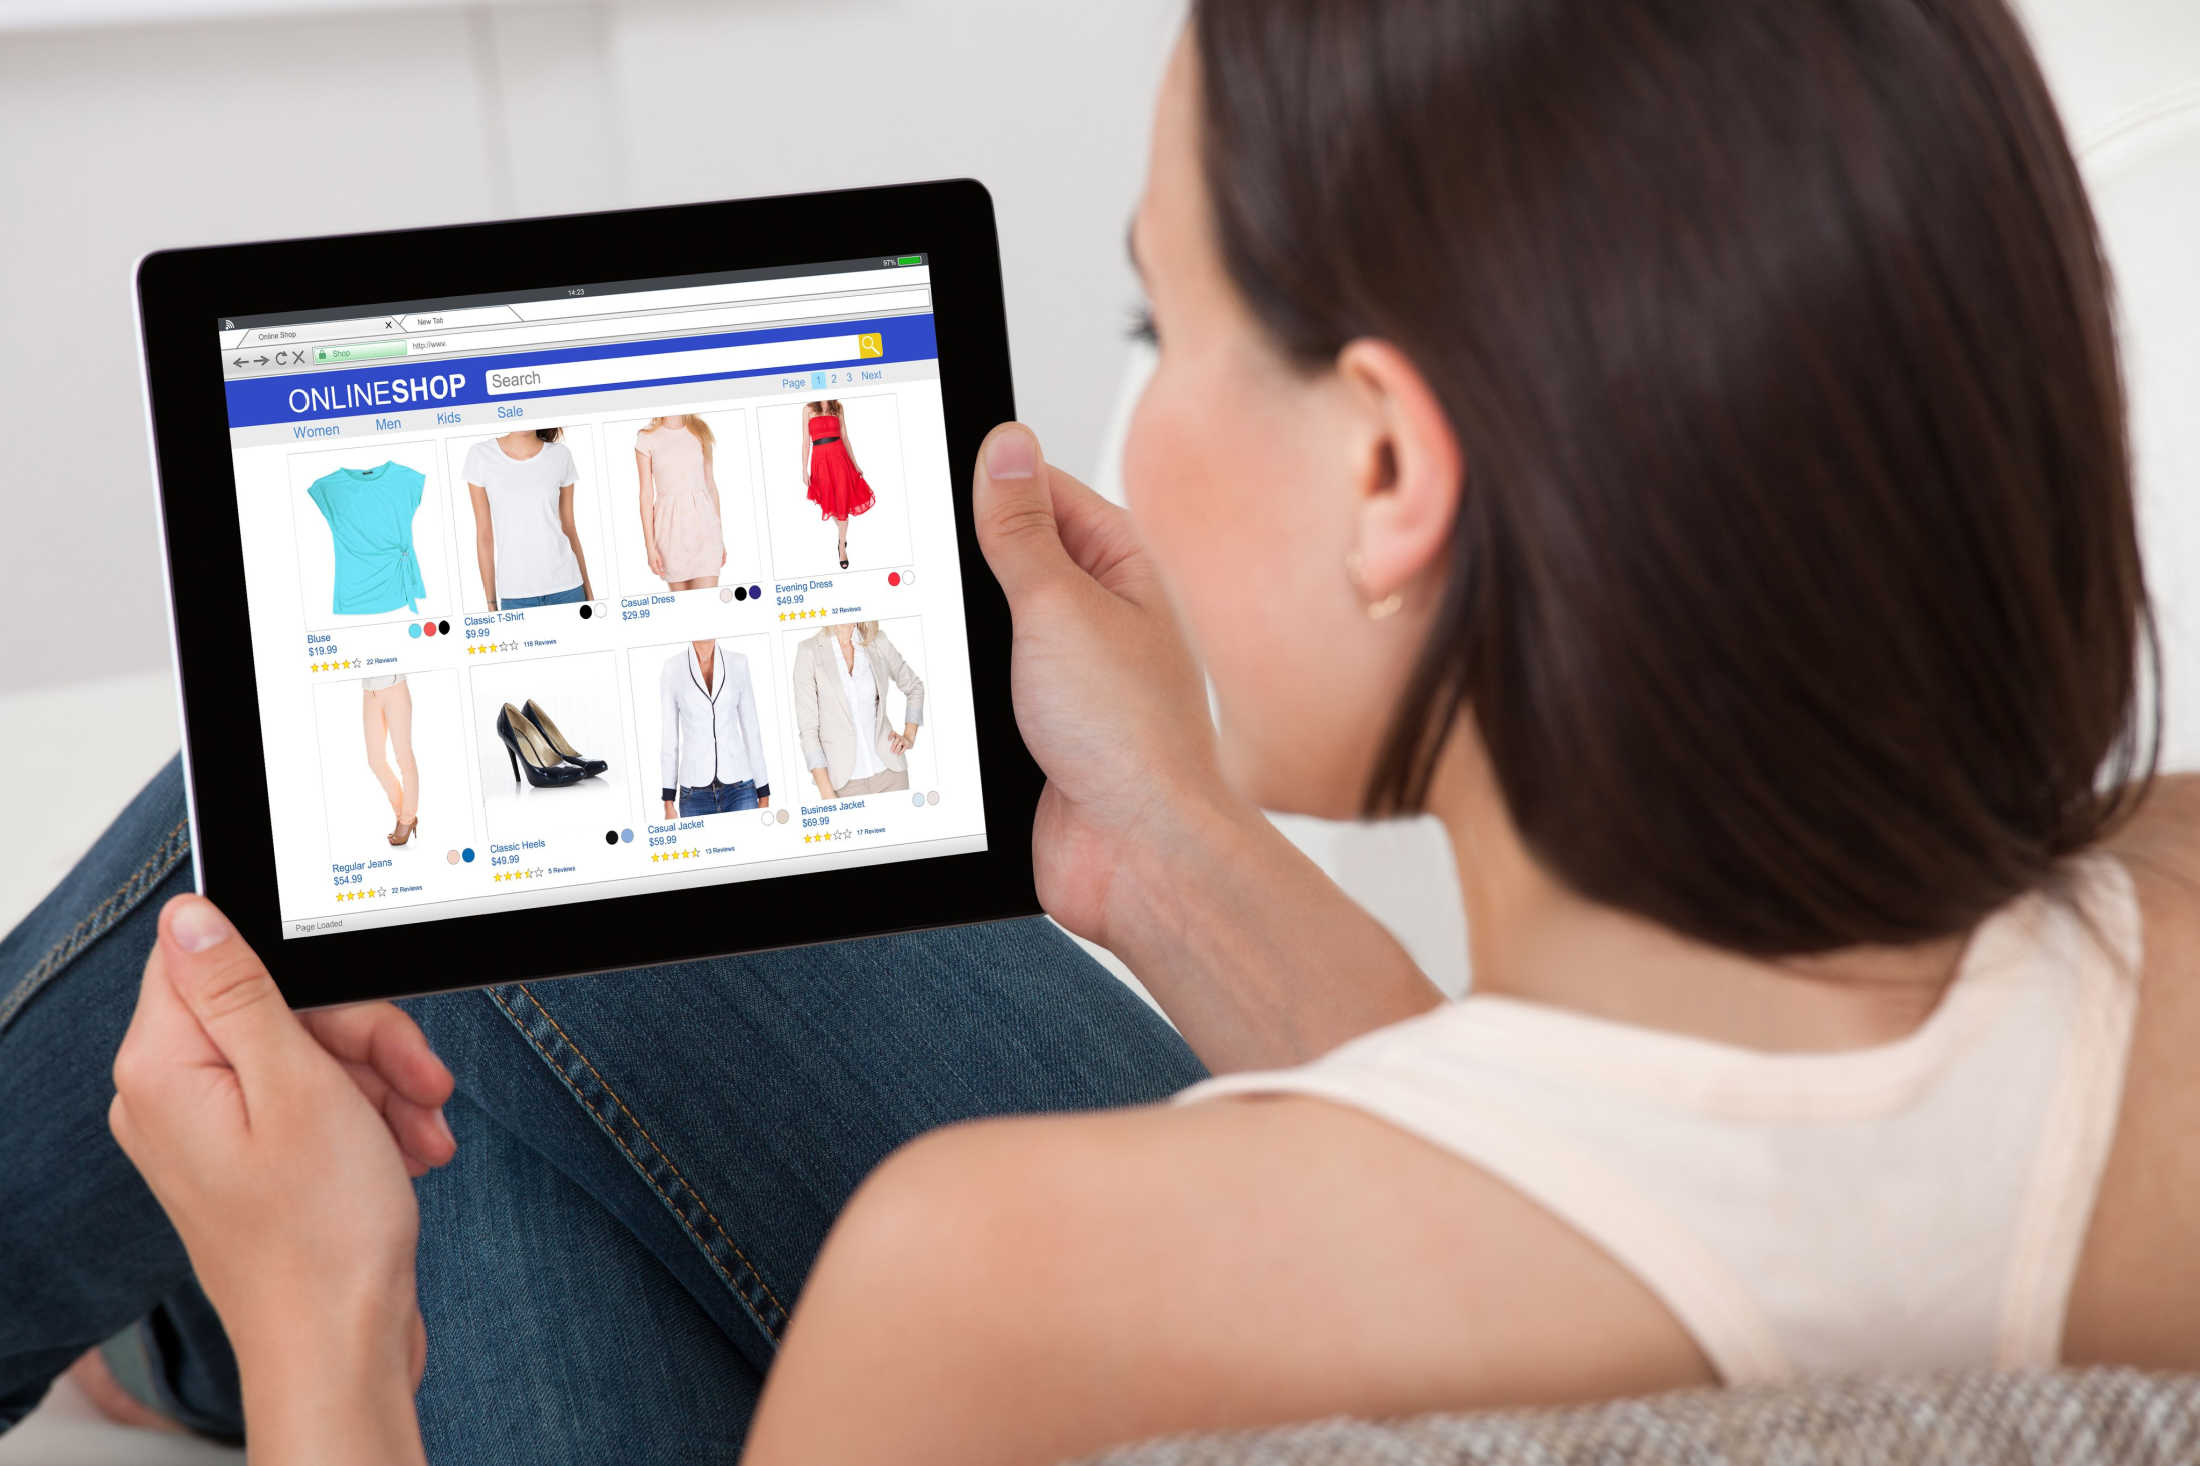 Over the shoulder view of a woman sitting on her couch while online shopping for female clothing on a tablet.